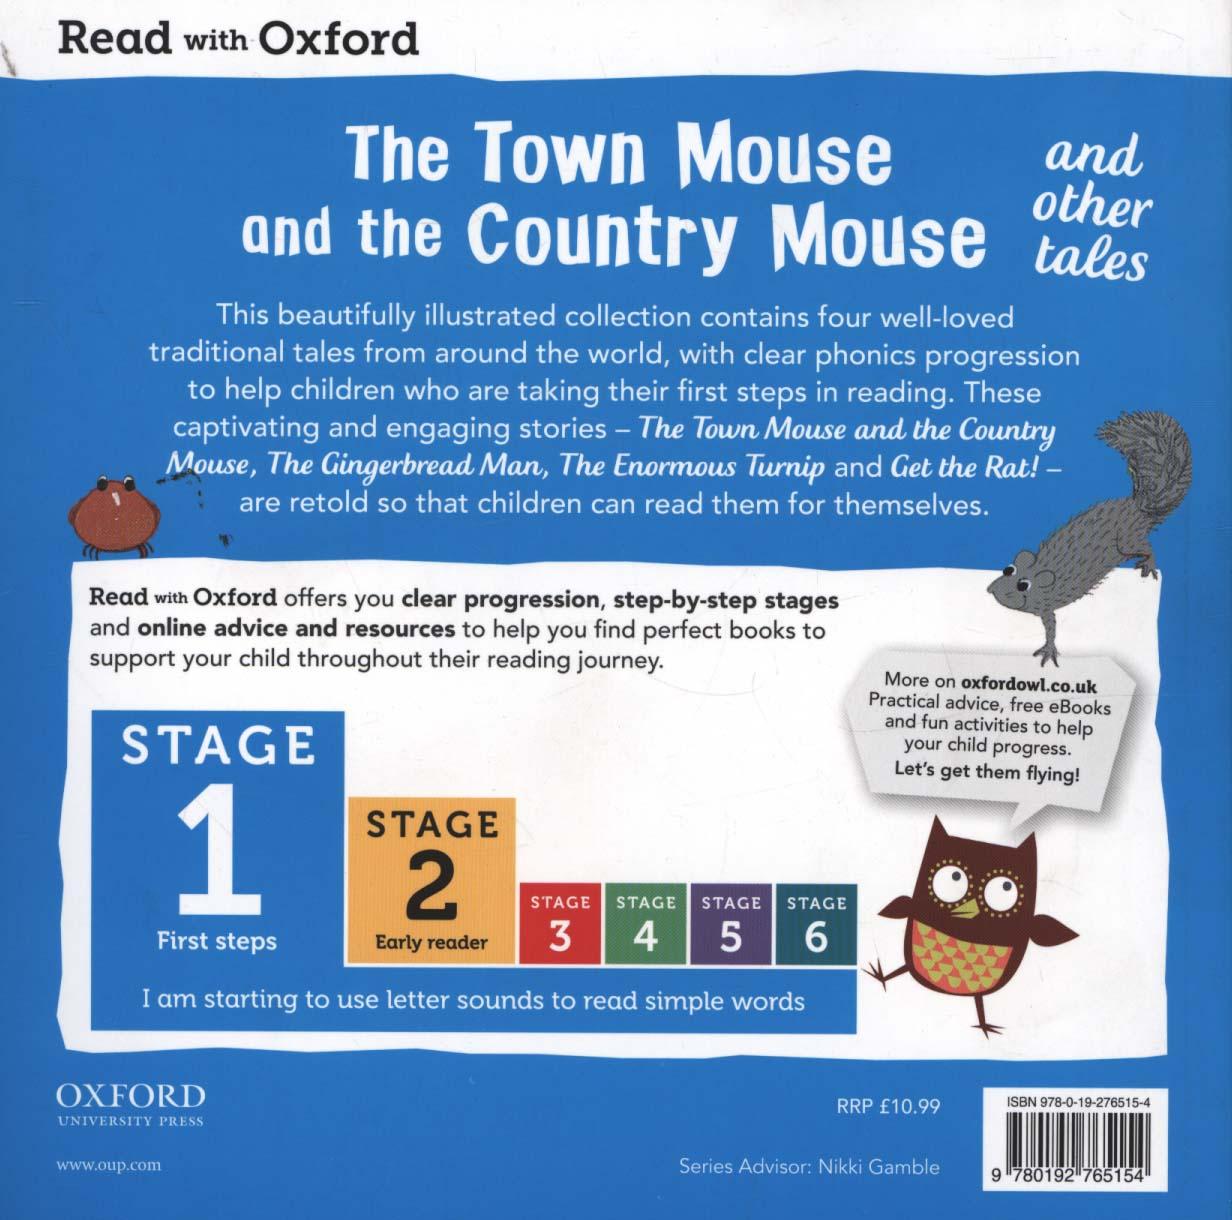 Read with Oxford: Stage 4: Julia Donaldson's Songbirds: Clar